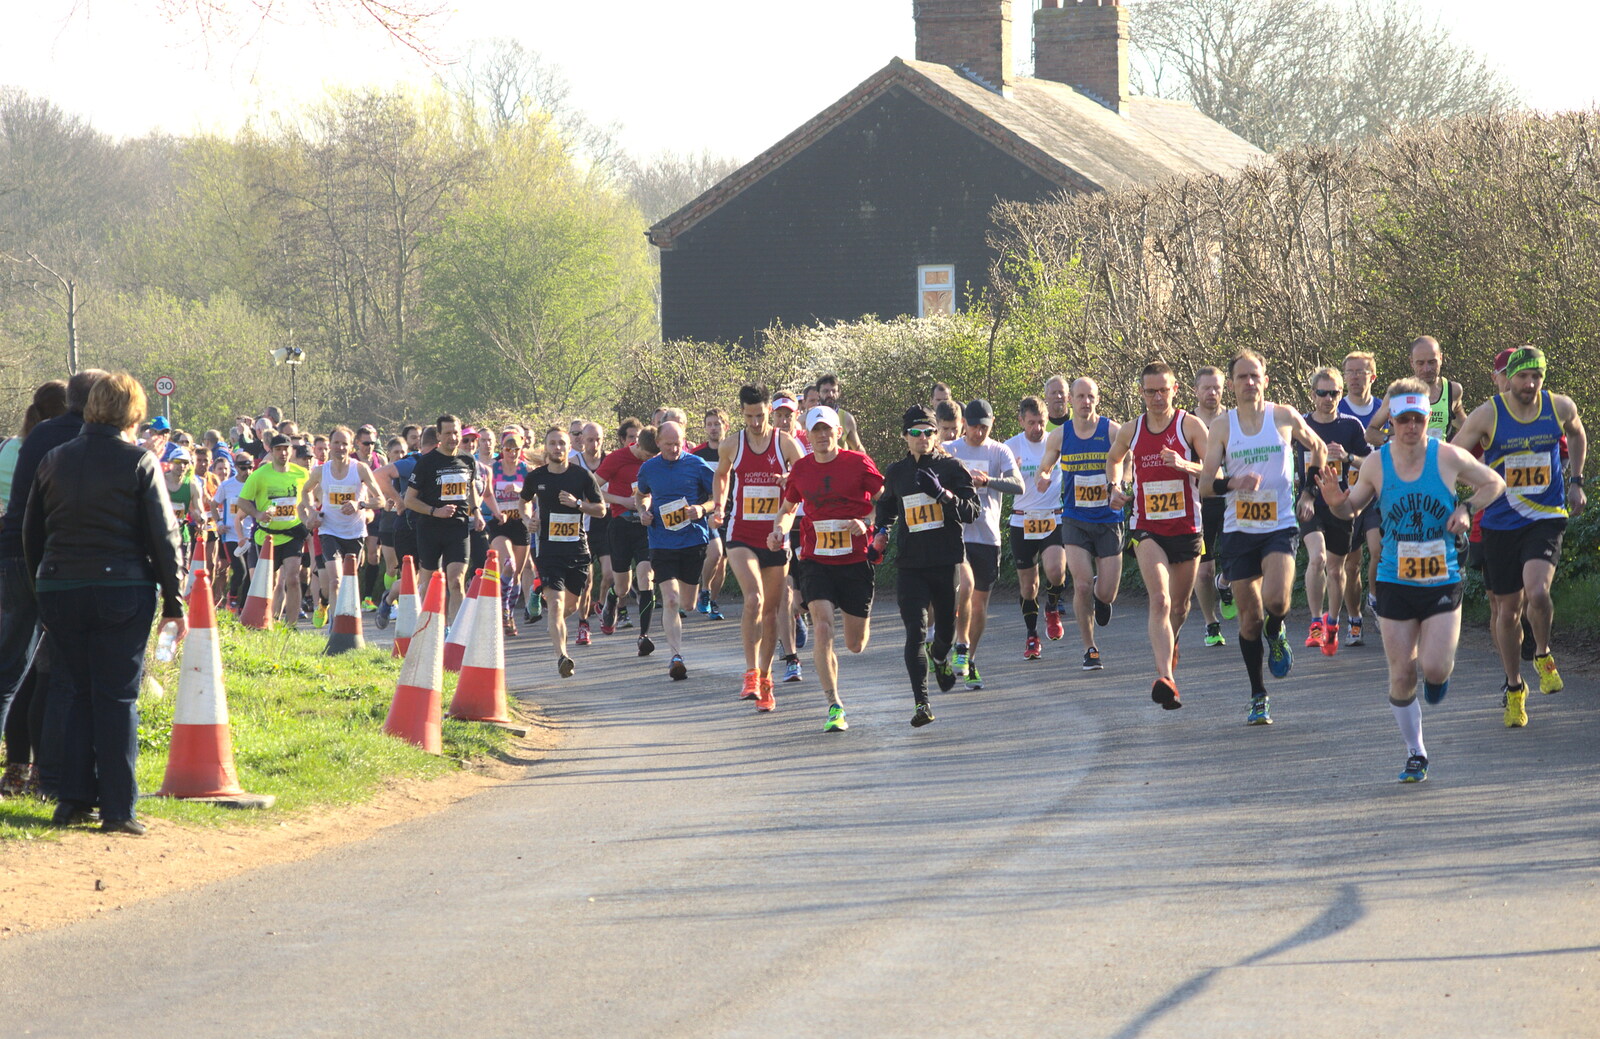 The Marathon runners set off from The Black Dog Festival of Running, Bungay, Suffolk - 2nd April 2017